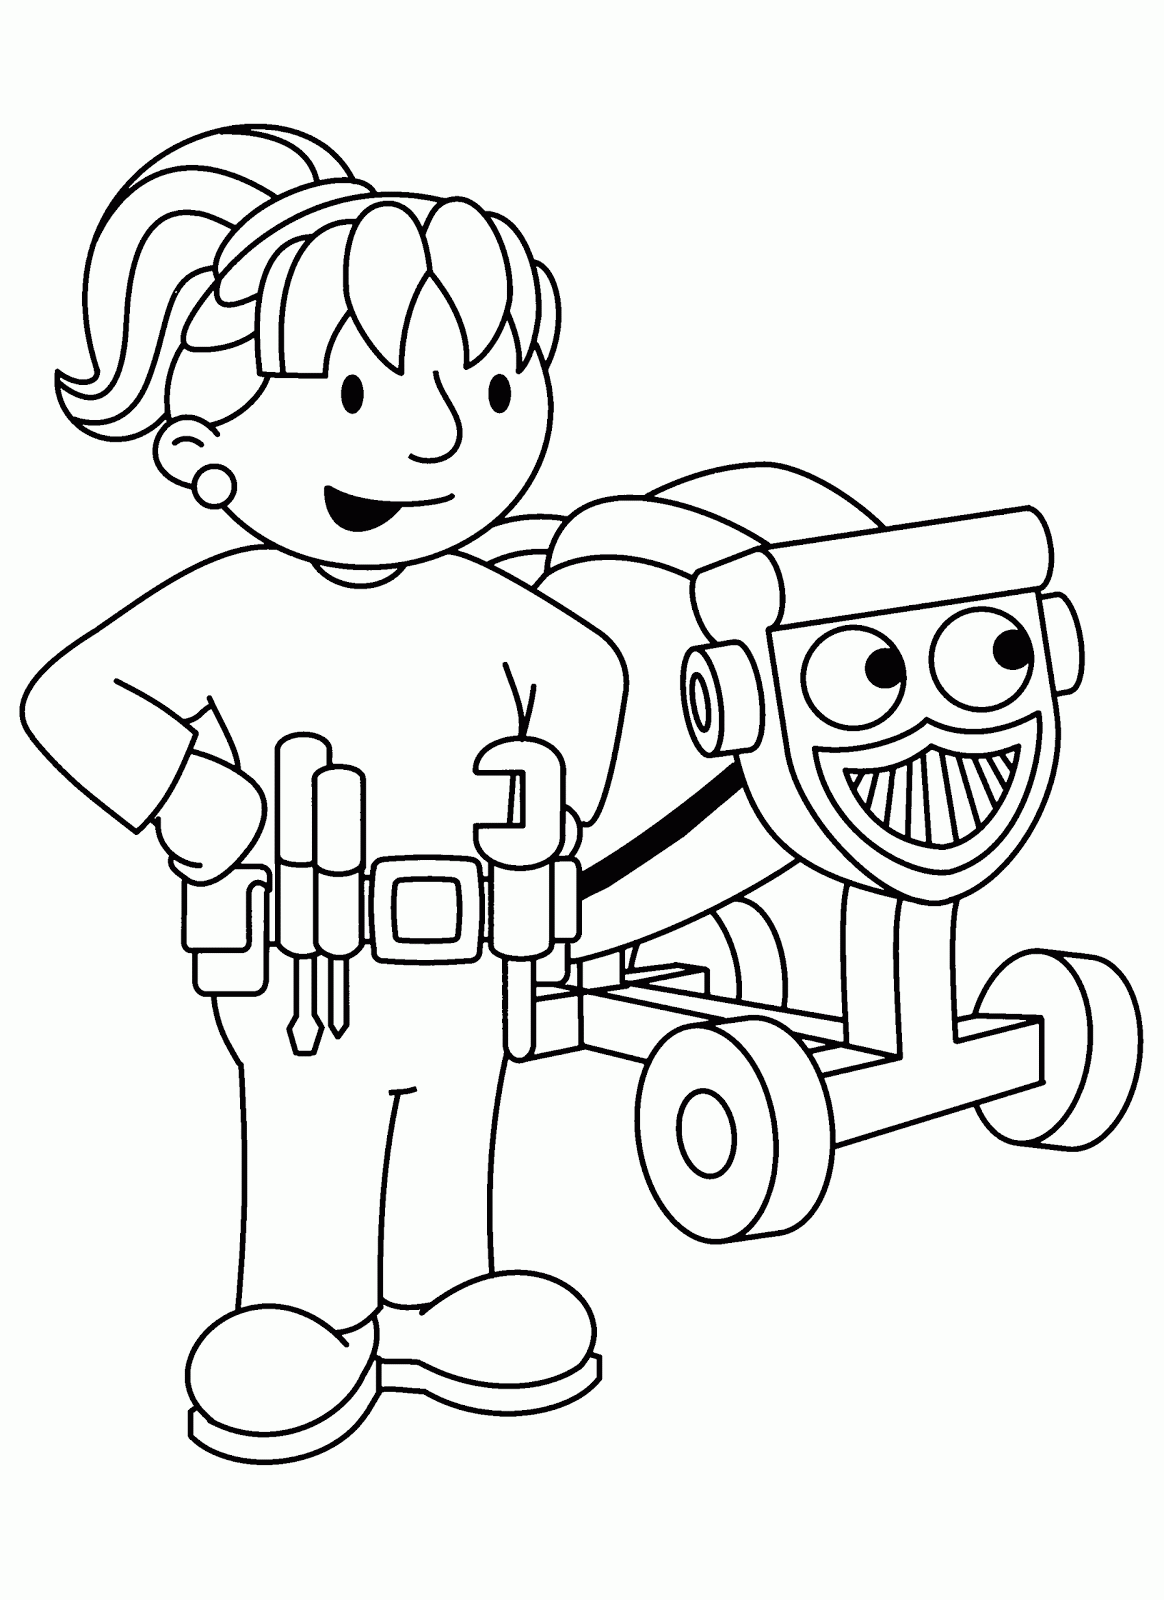 Bob the builder coloring pages - Lets coloring!